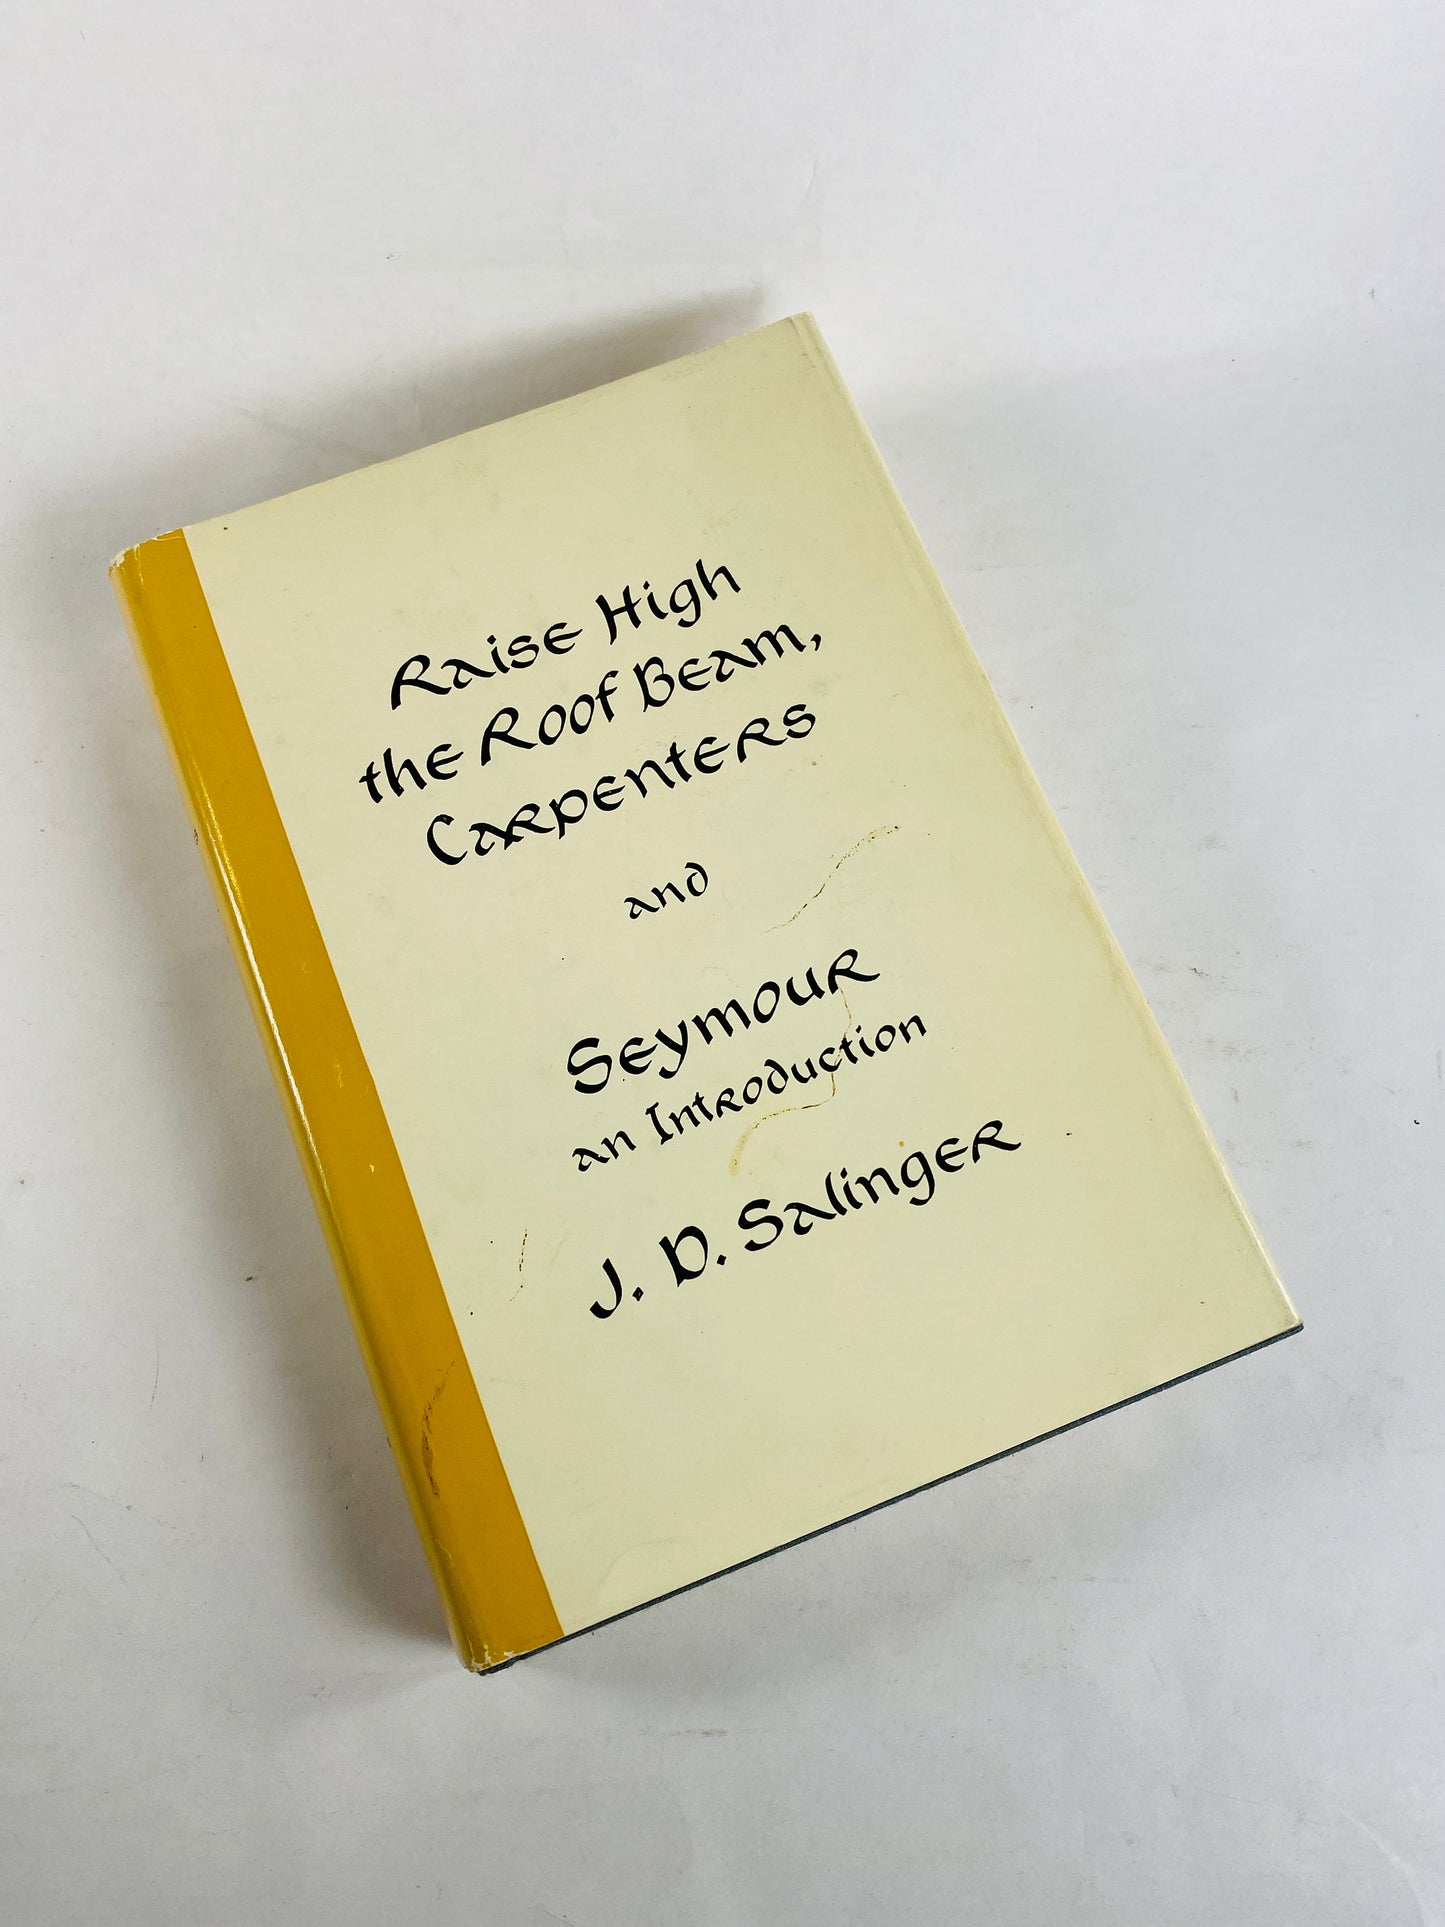 1959 Raise High the Roof Beam, Carpenters and Seymour FIRST EDITION Vintage book by JD Salinger with dust jacket circa 1959.